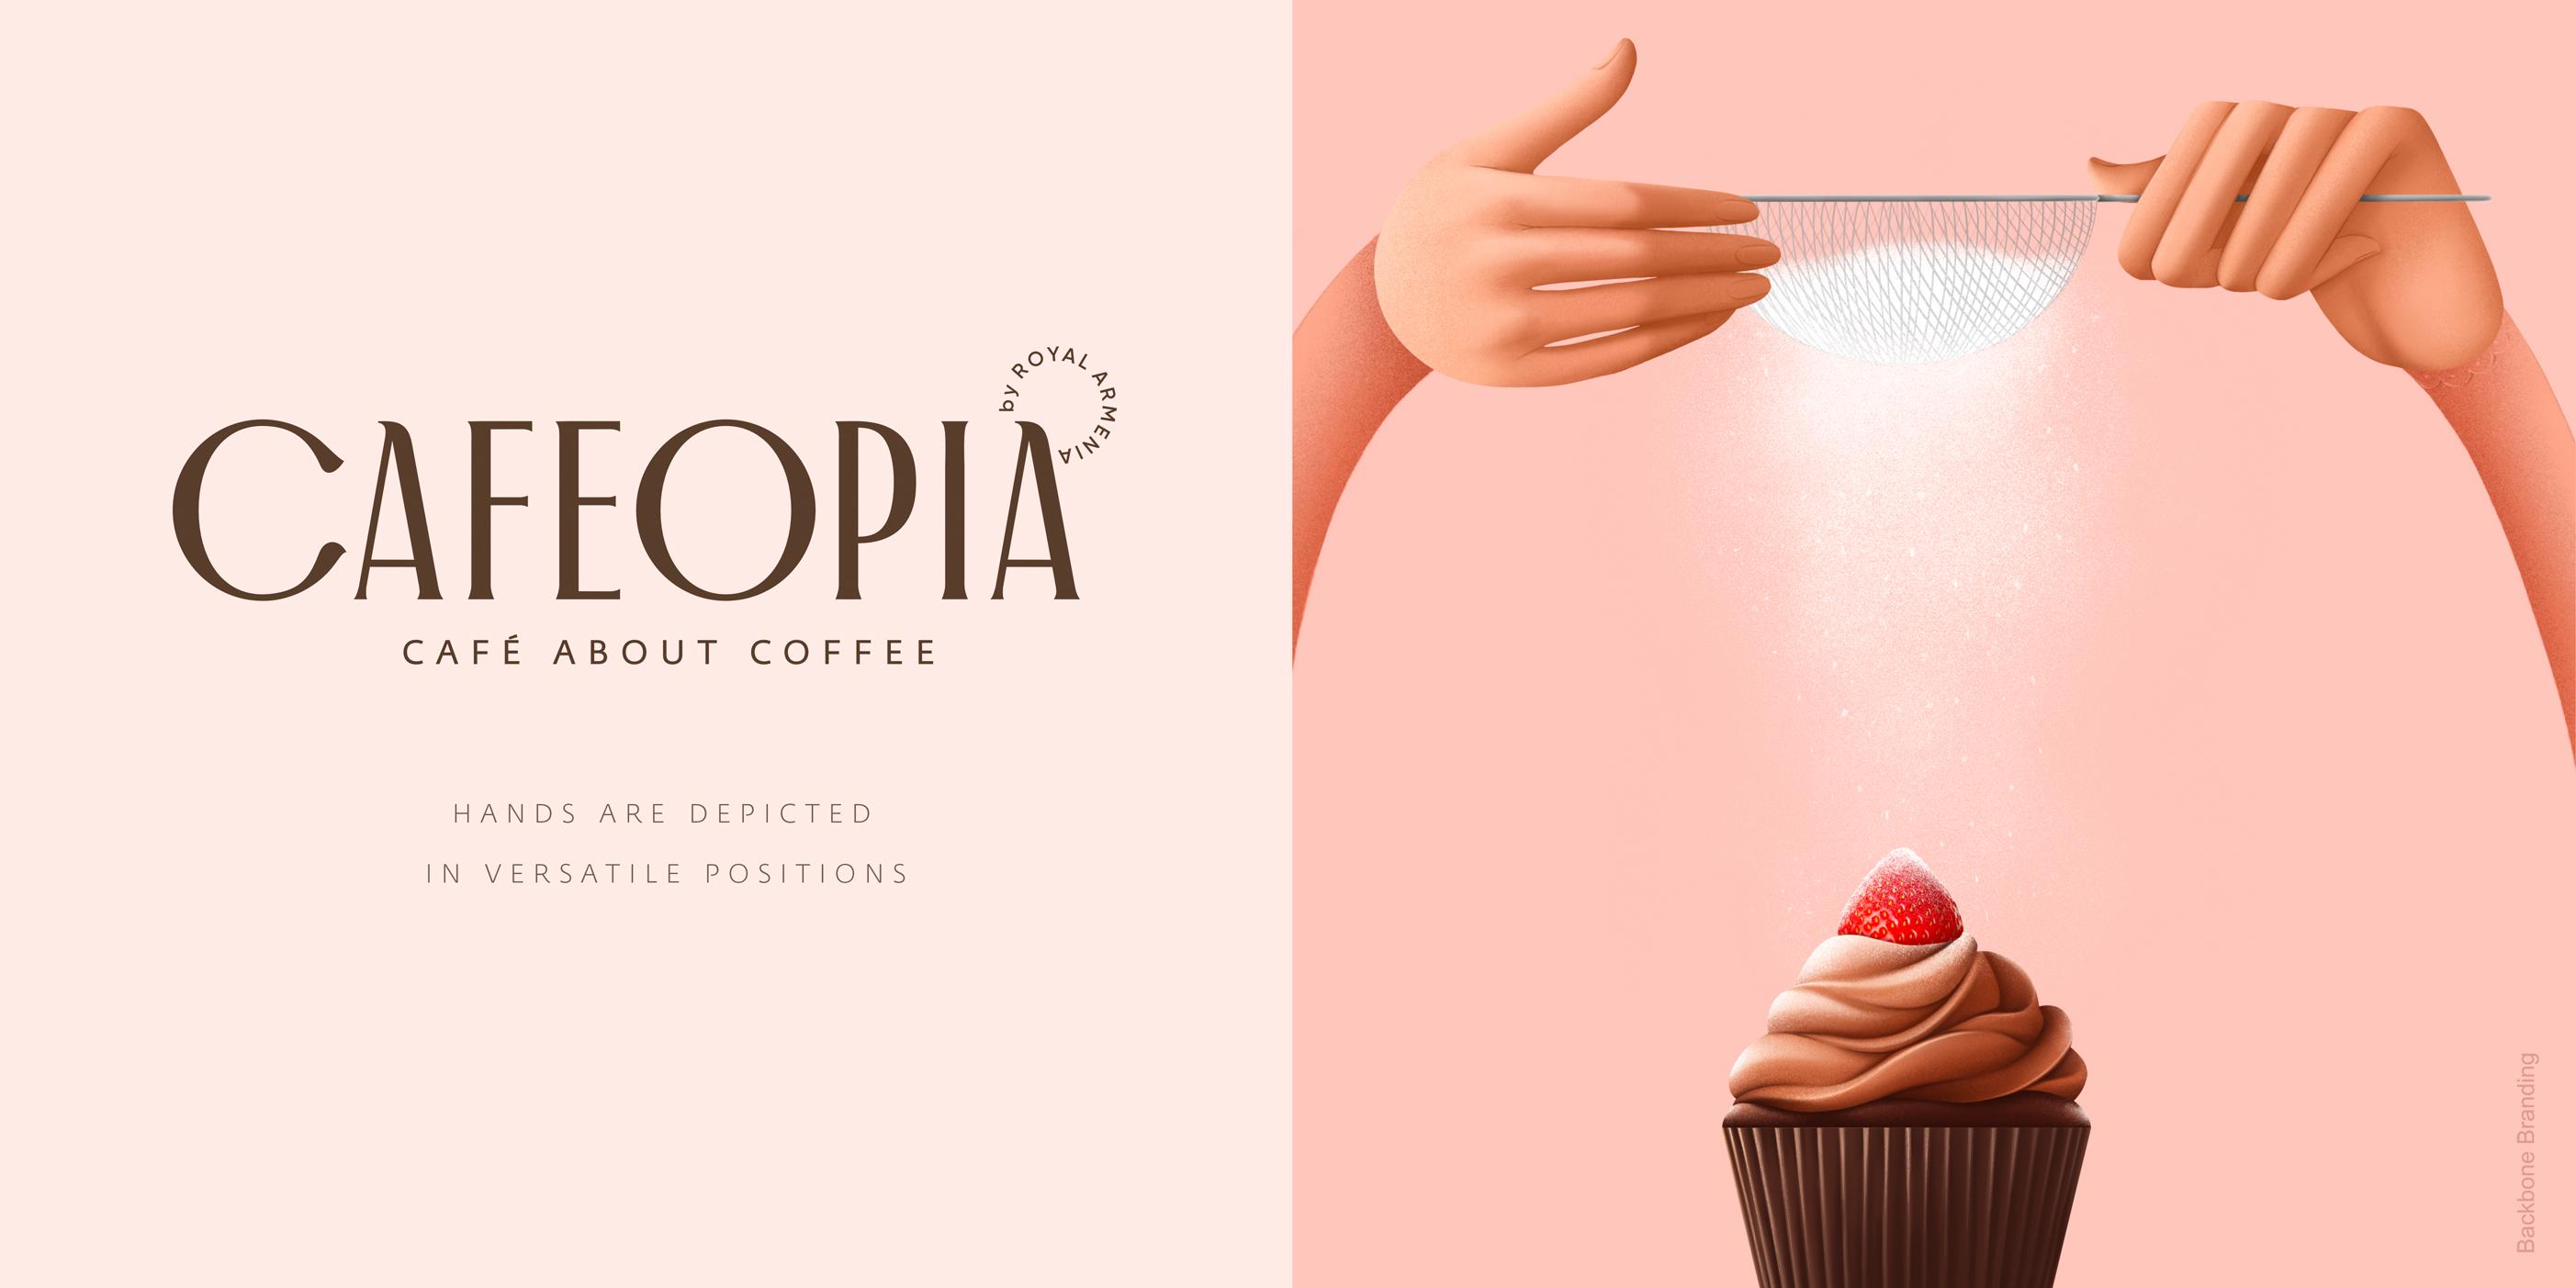 cafeopia_08